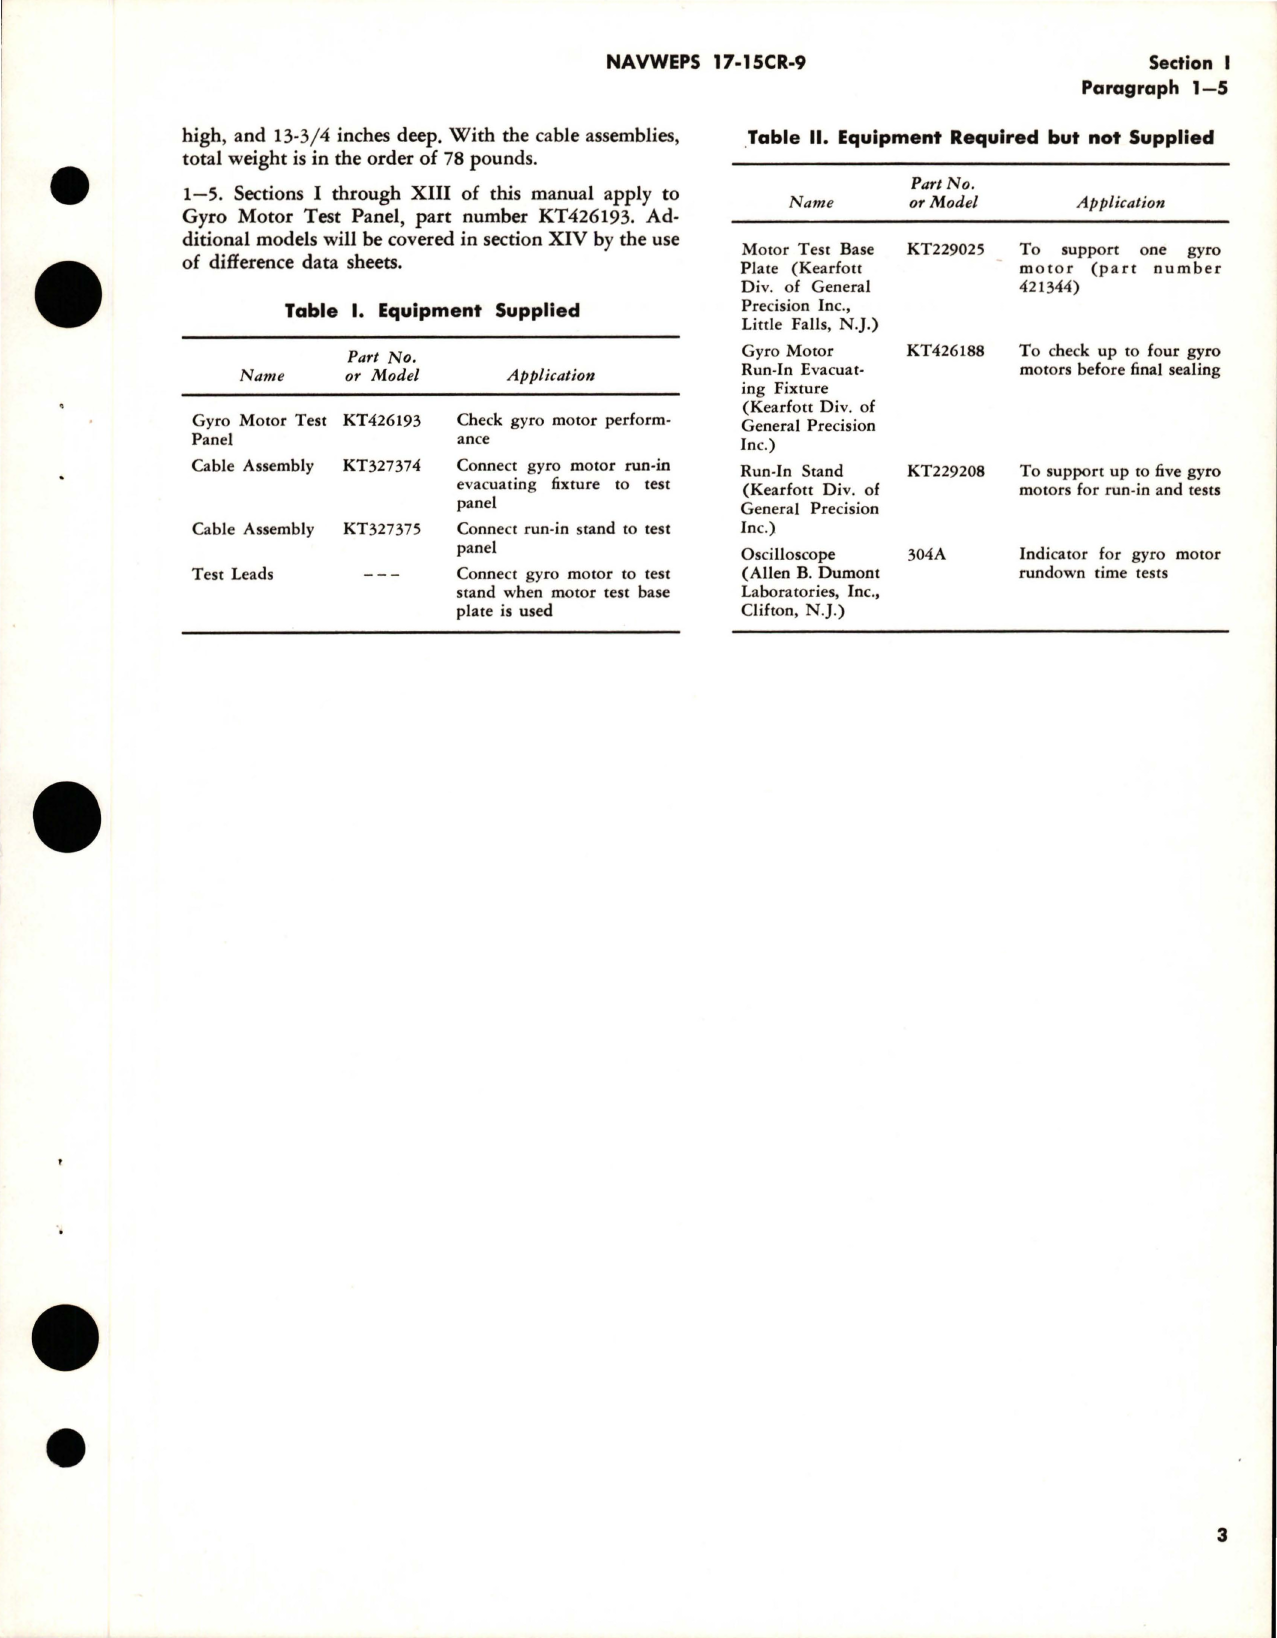 Sample page 7 from AirCorps Library document: Operation, Service Instructions and Illustrated Parts Breakdown for Gyro Motor Test Panel - Part KT426193